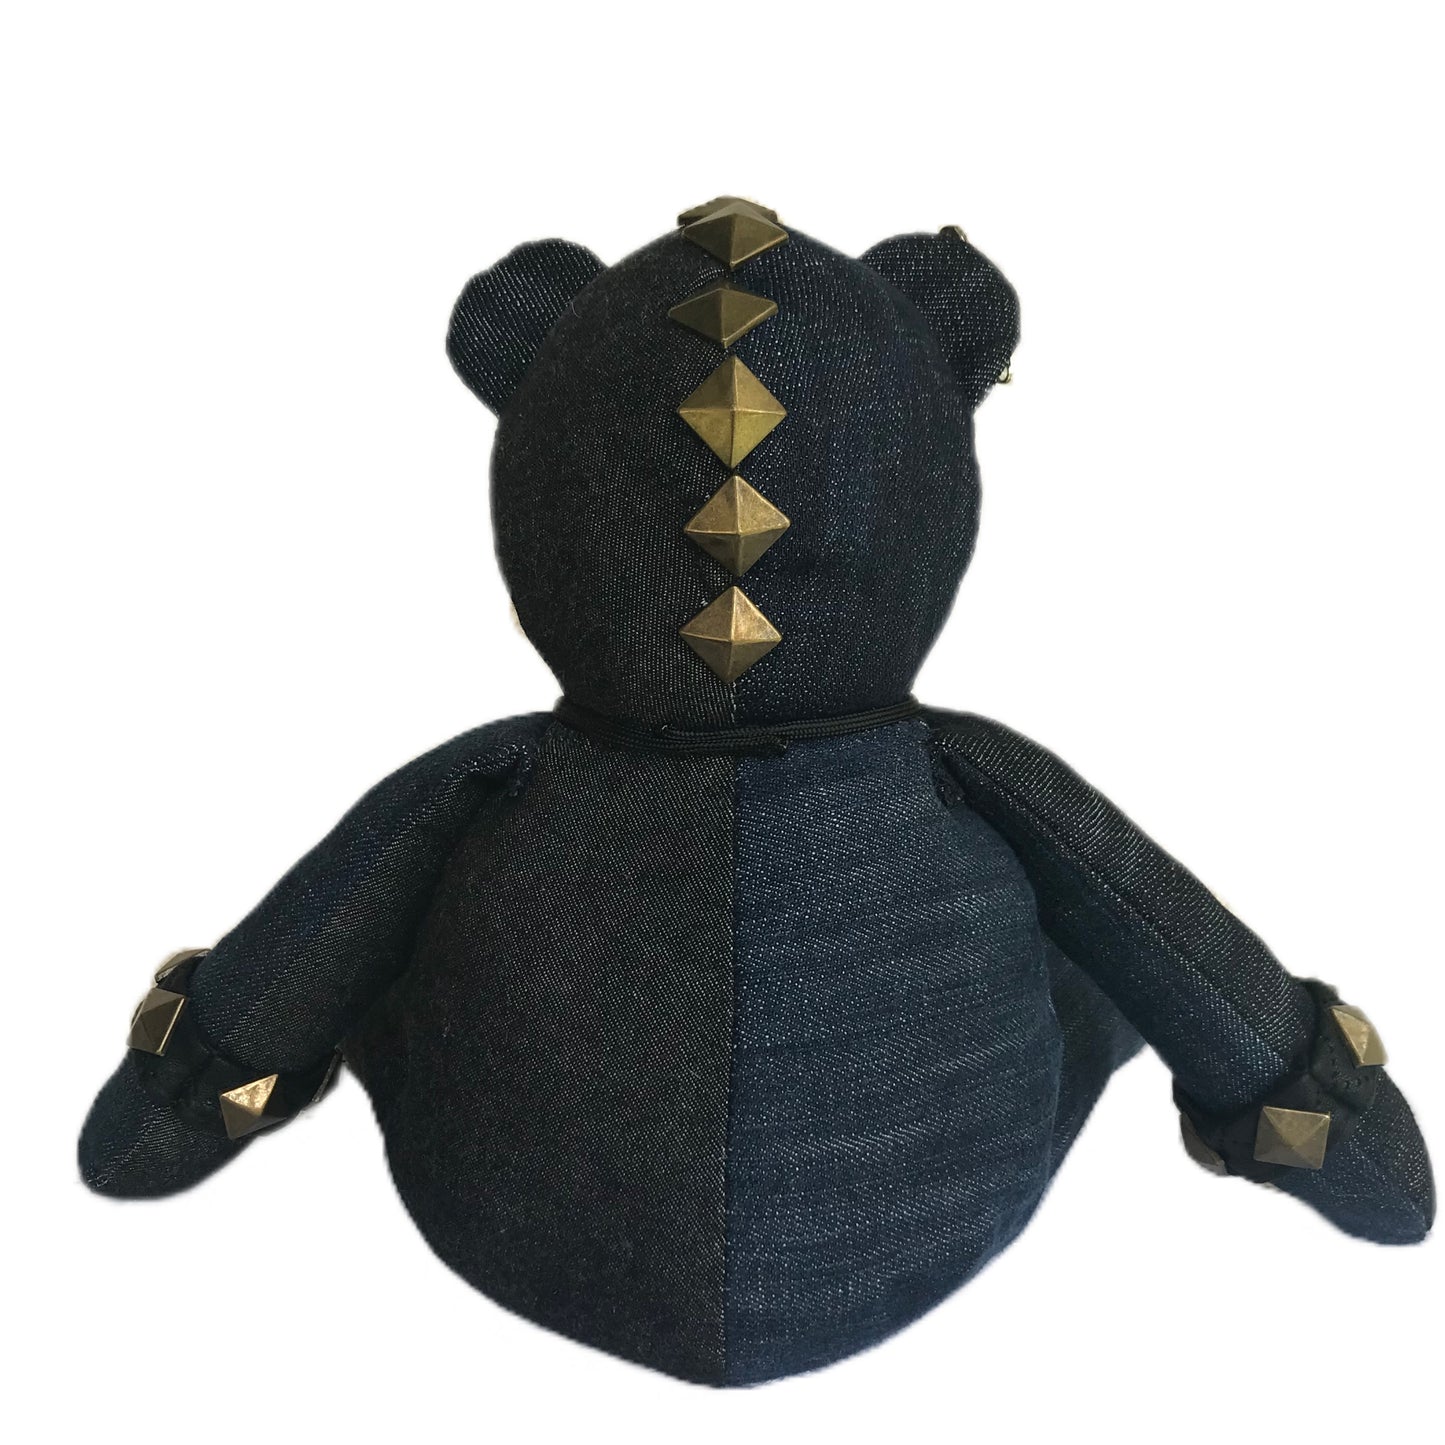 Punk Rock Teddy Bear - Made from Recycle Denim Jeans